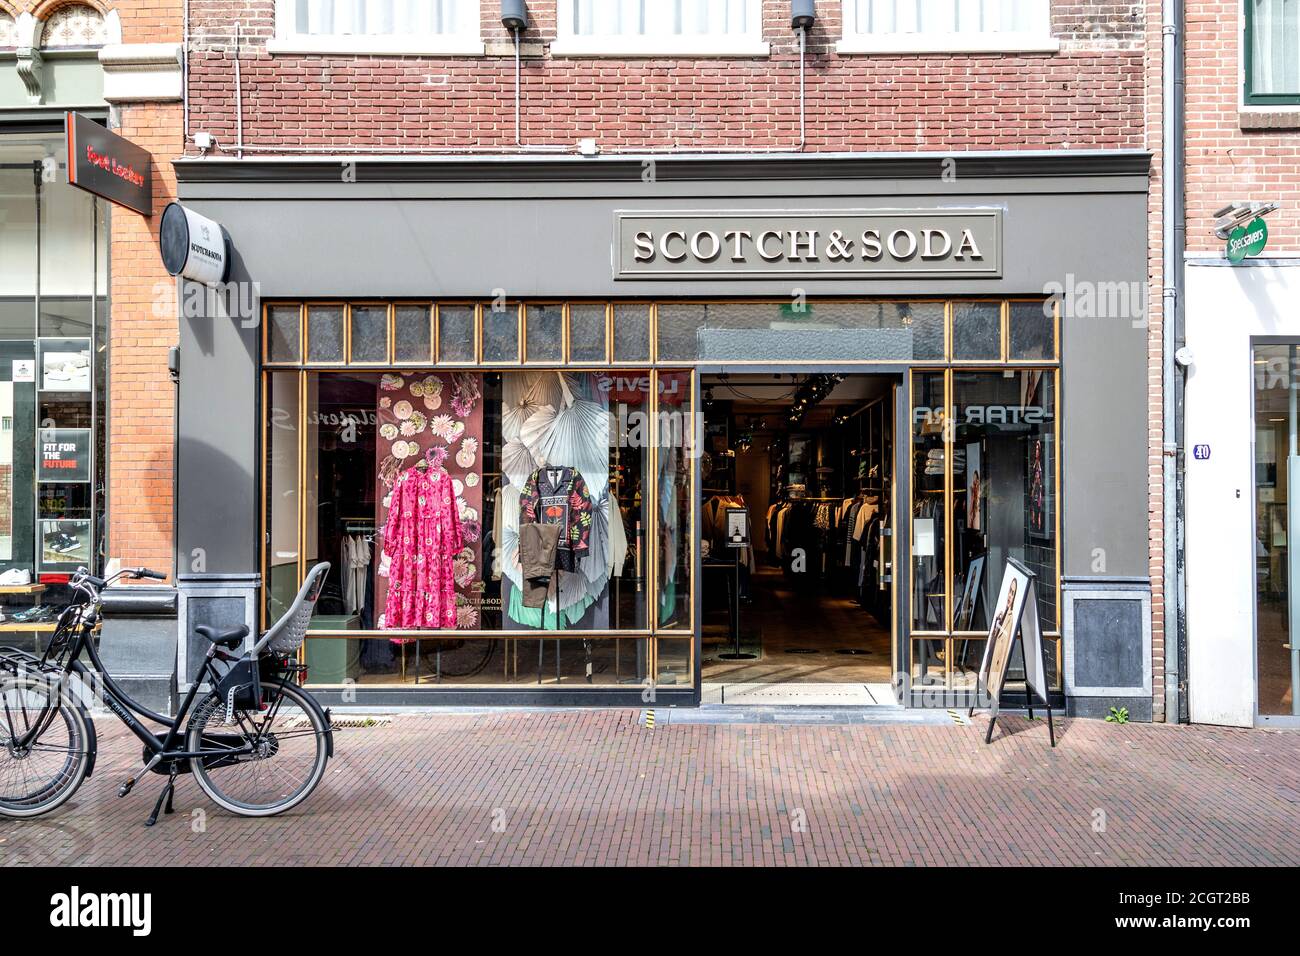 Scotch & Soda store in Amersfoort, The Netherlands. Scotch and Soda is a Dutch fashion retail company founded in 1985. Stock Photo